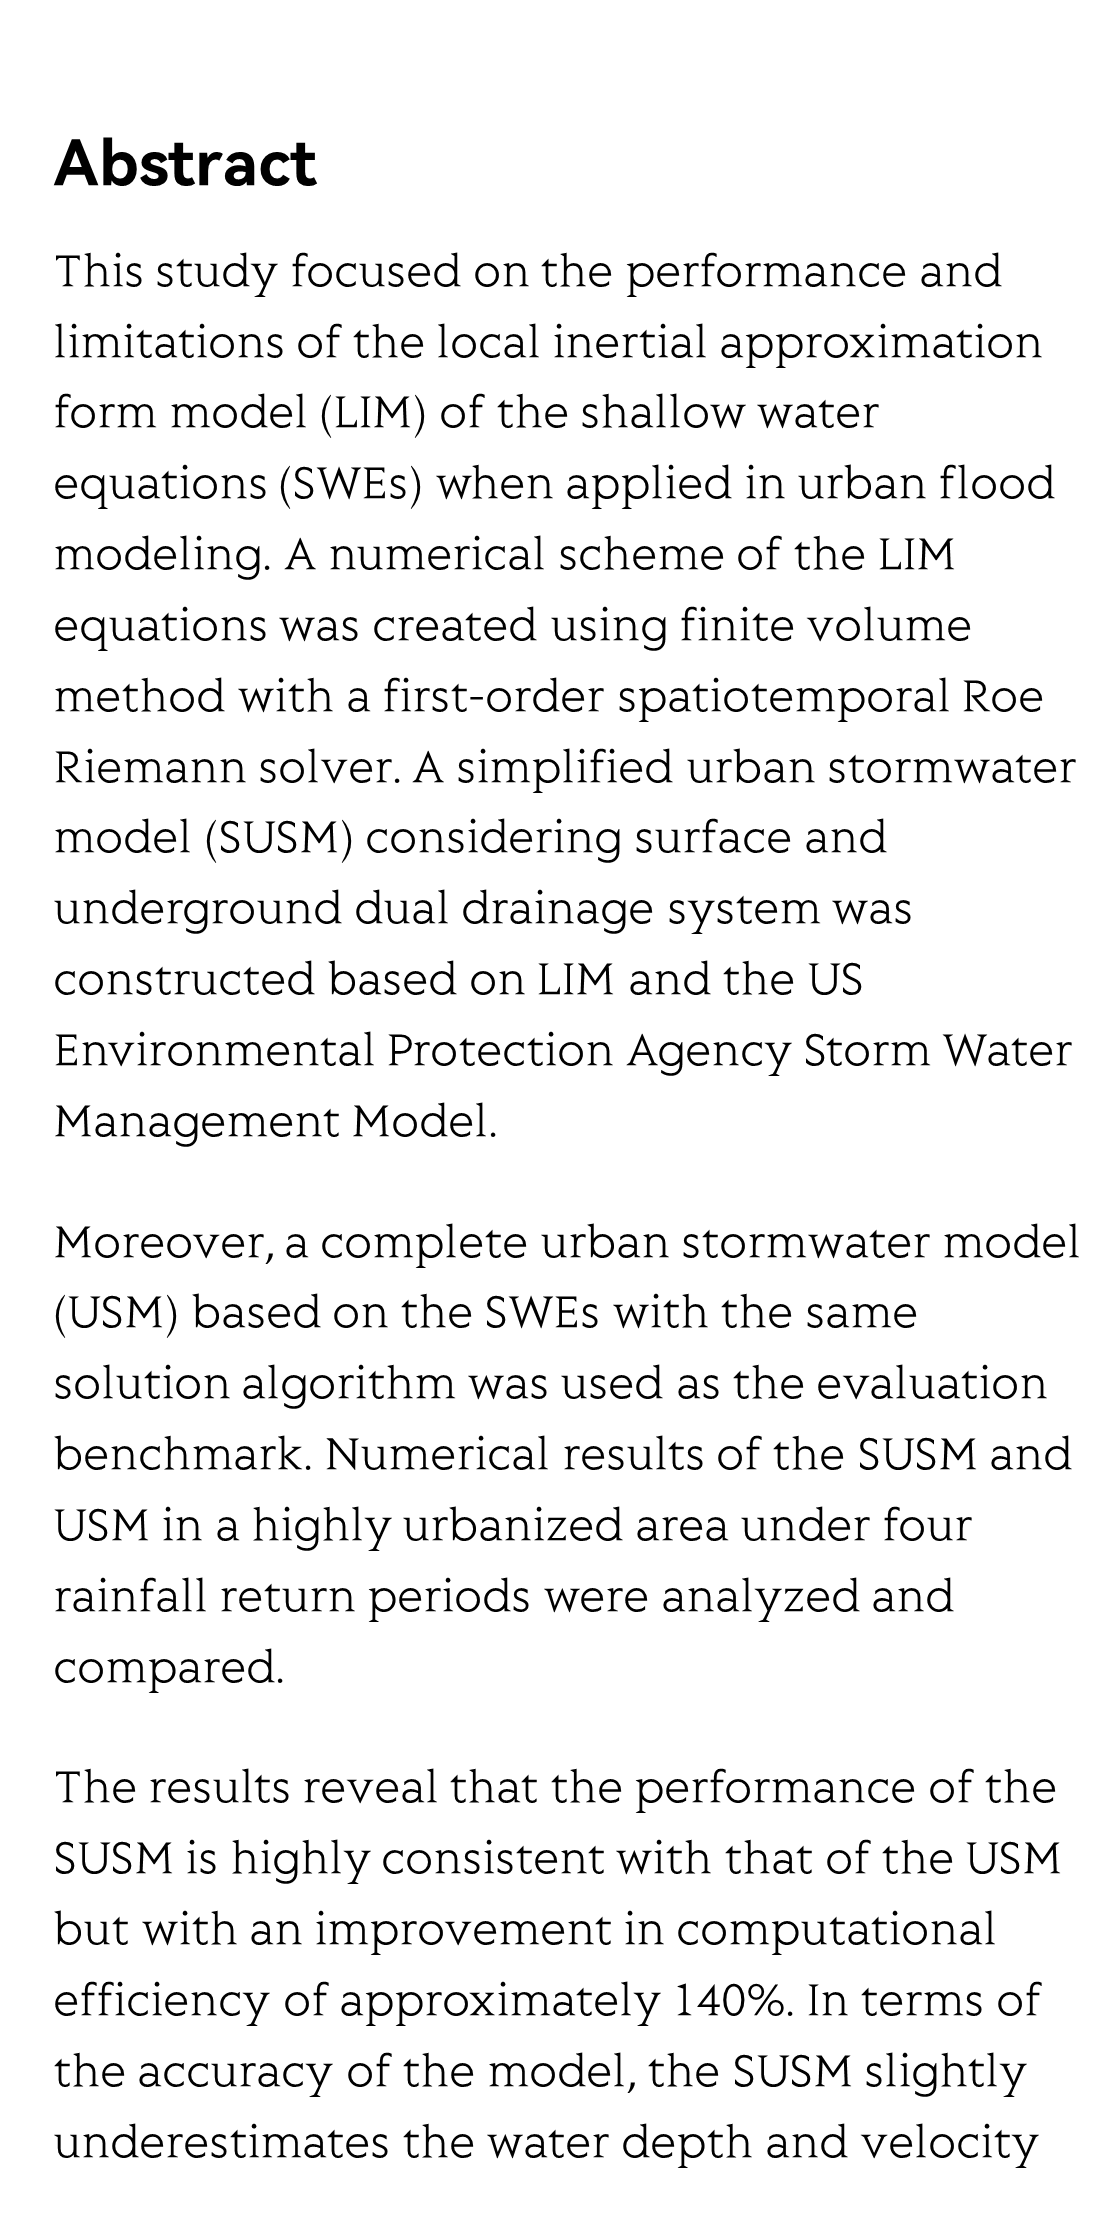 Urban Stormwater Modeling with Local Inertial Approximation Form of Shallow Water Equations: A Comparative Study_2